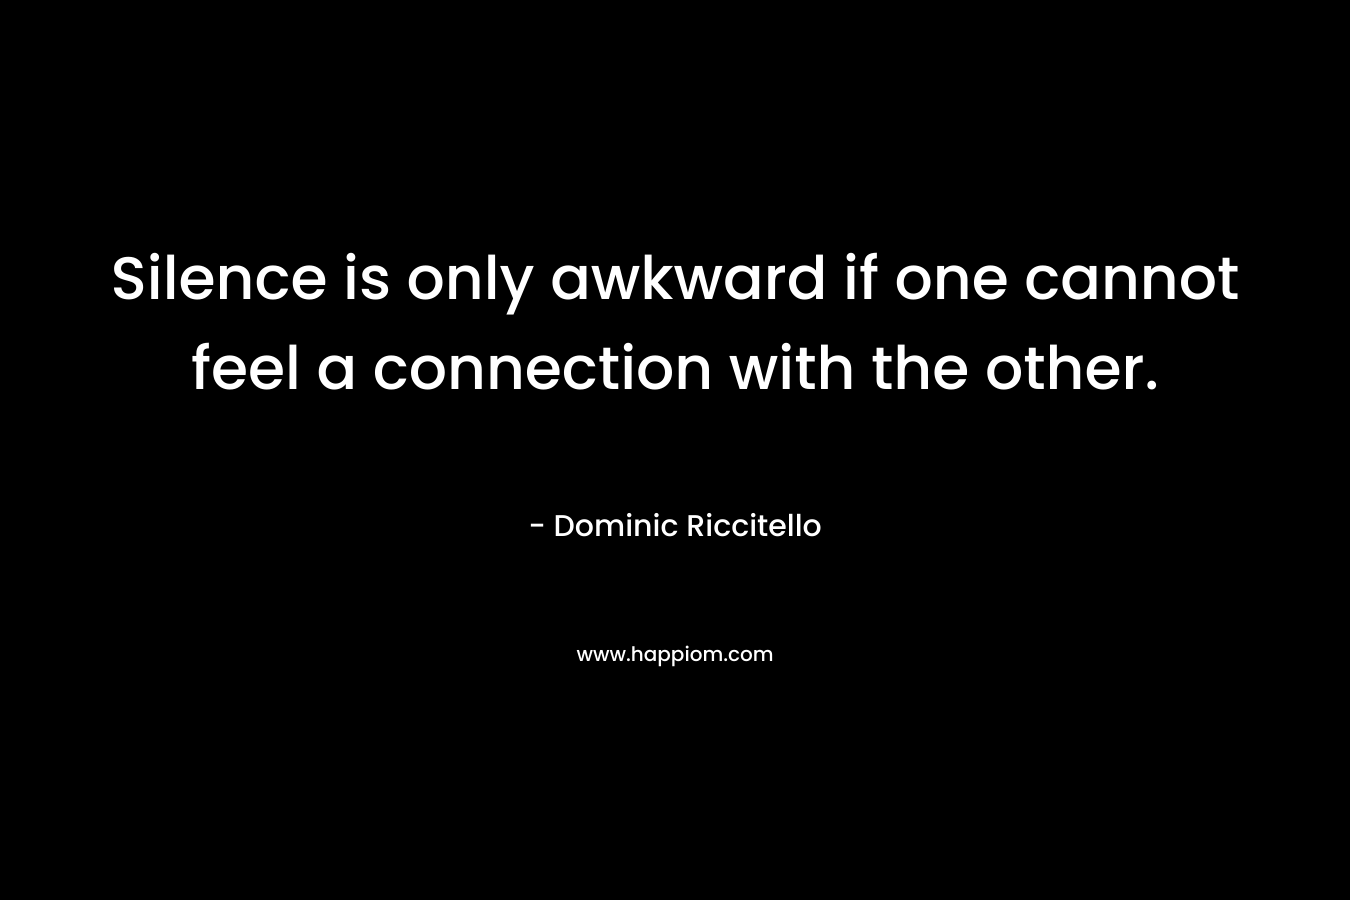 Silence is only awkward if one cannot feel a connection with the other.